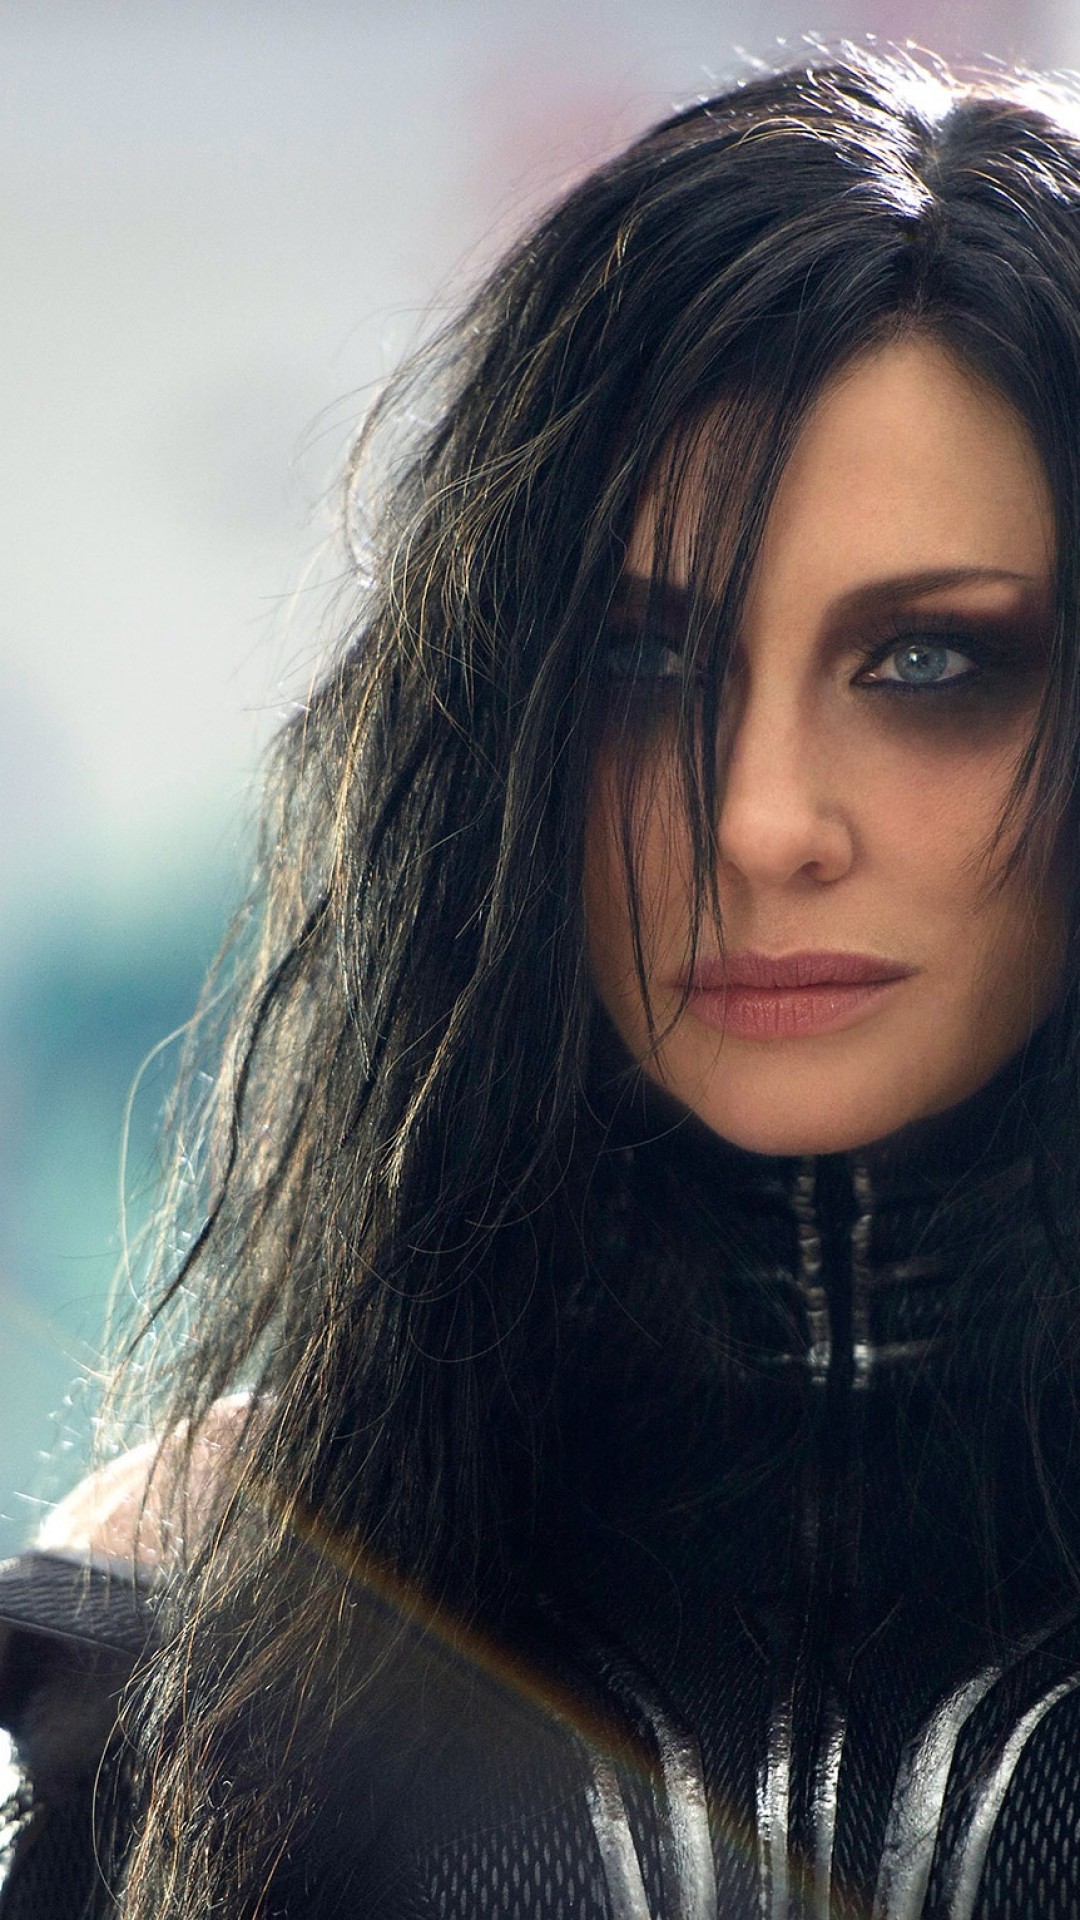 Cate Blanchett As Hela In Thor Wallpapers